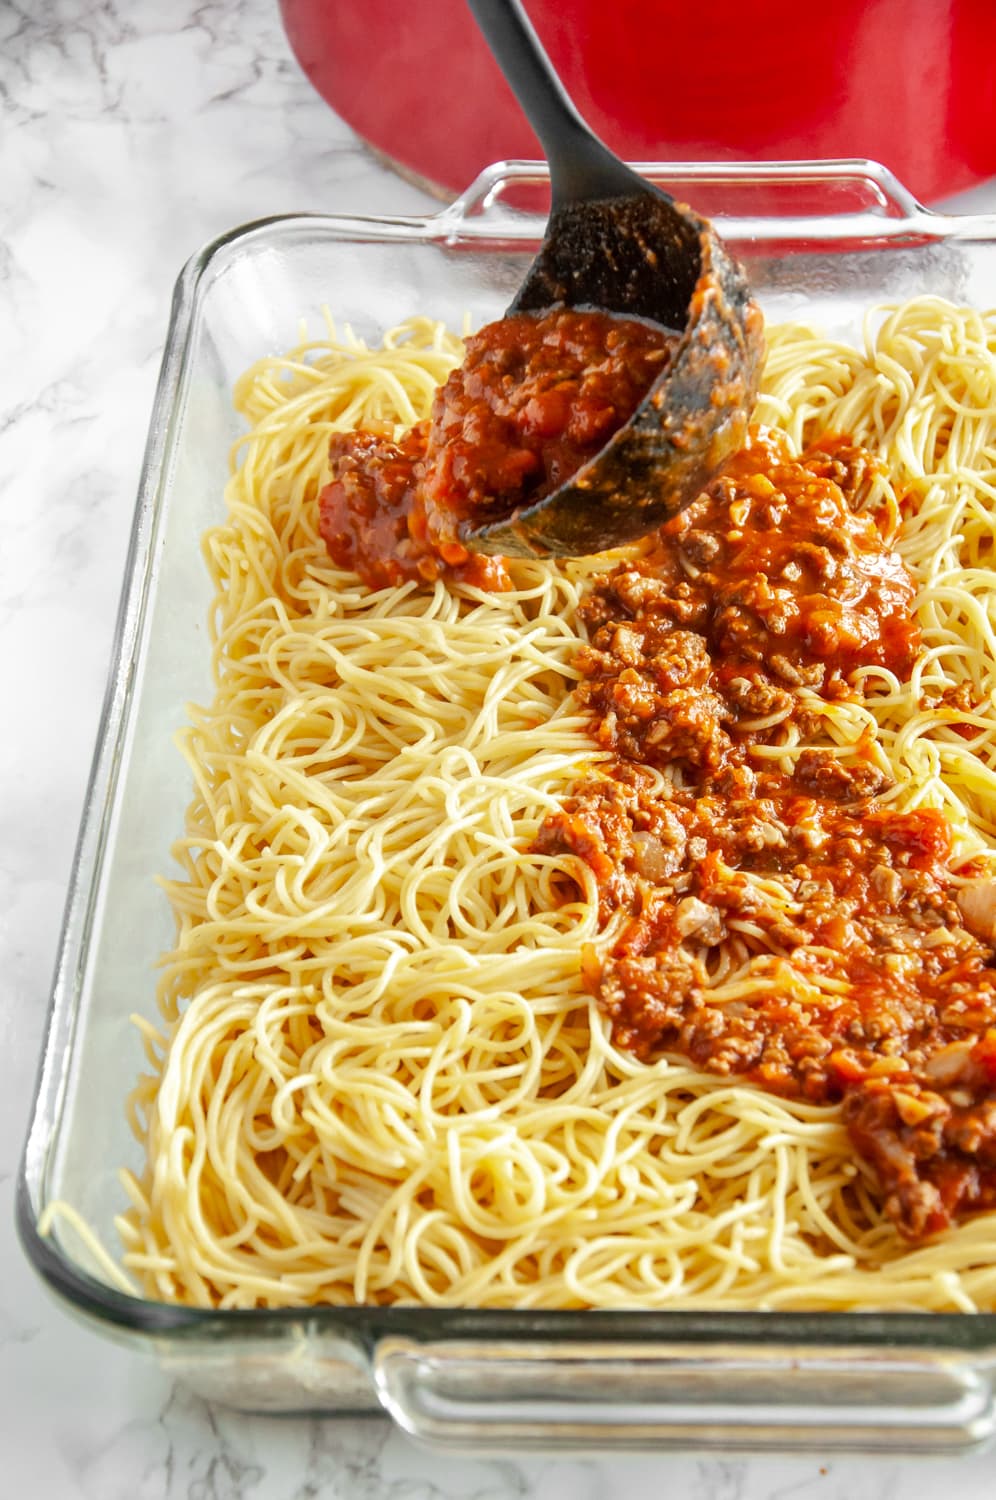 spreading red sauce over cooked spaghetti in a glass baking dish